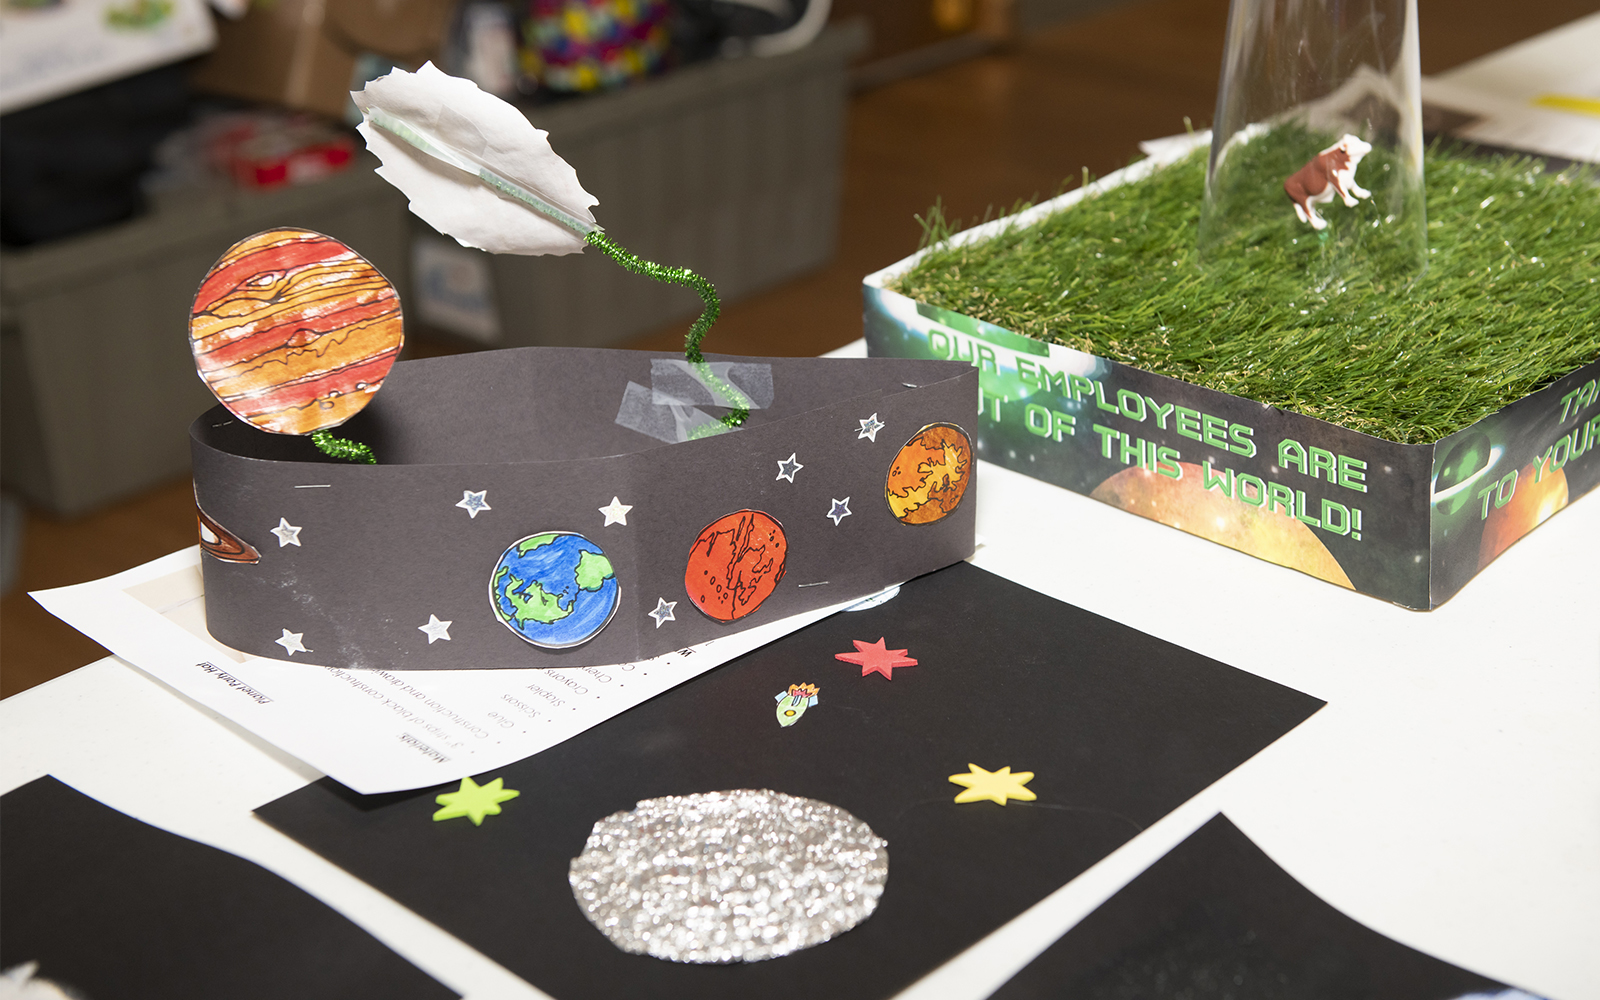 space themed crafts at the 2019 SRP workshop